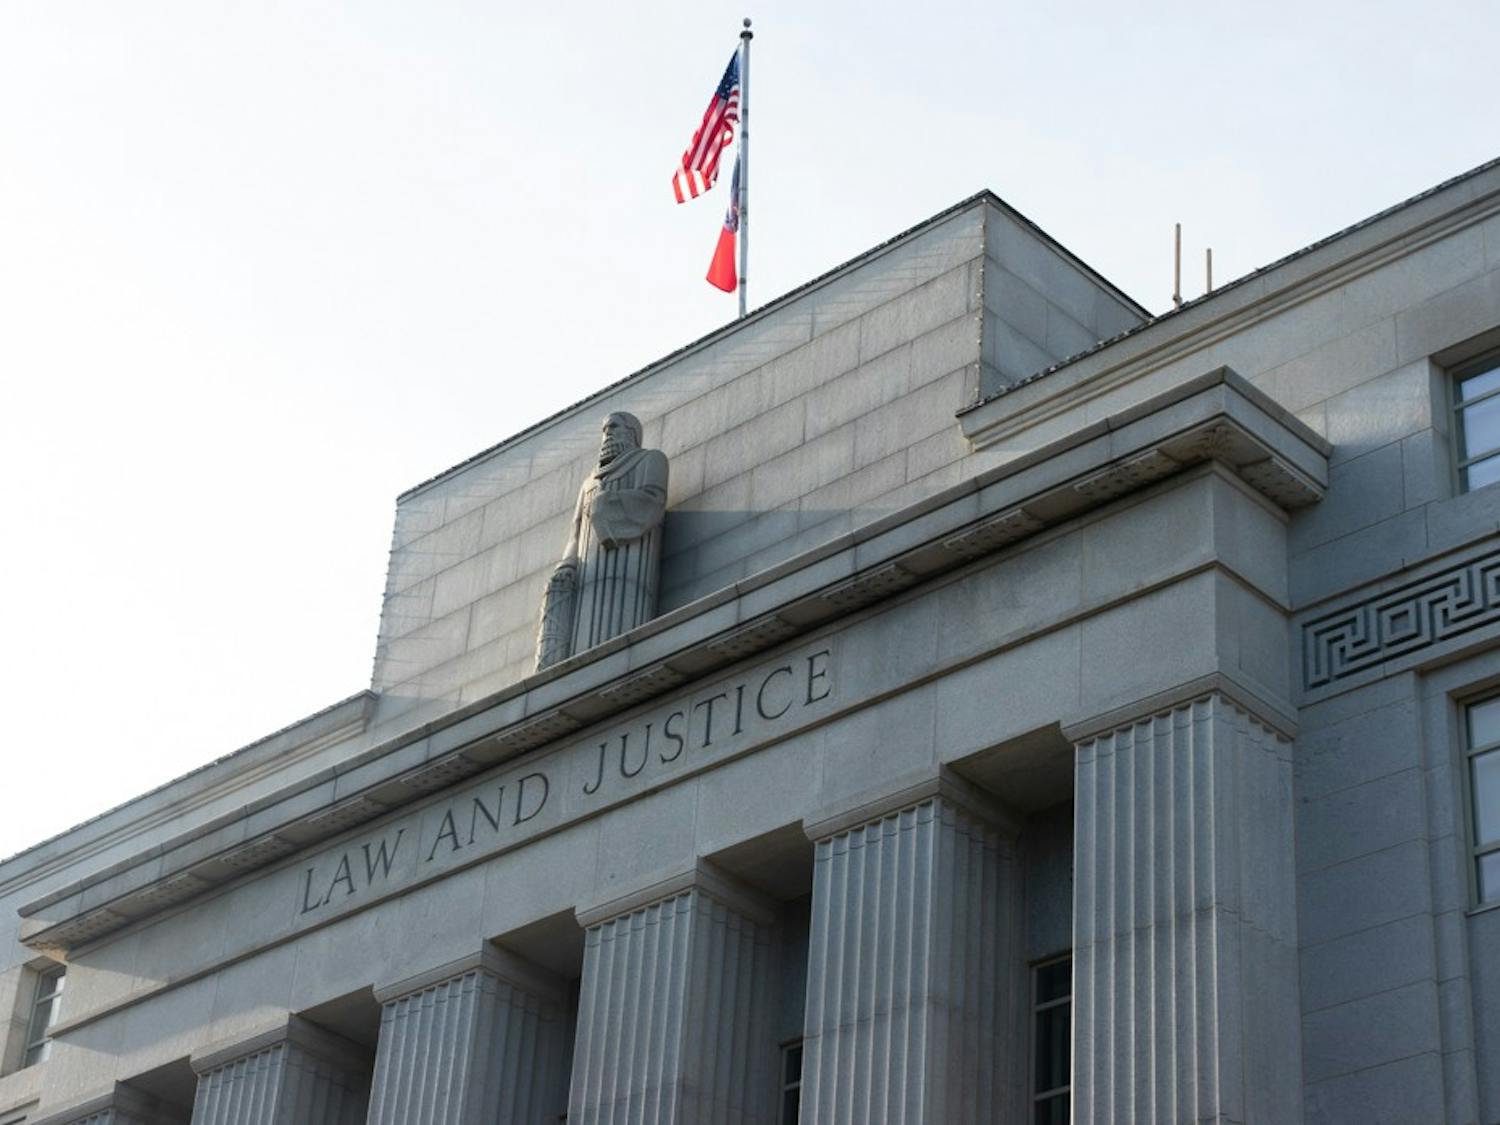 The North Carolina Supreme Court in the Law and Justice Building in Raleigh, N.C pictured on Tuesday, Aug. 18, 2020.